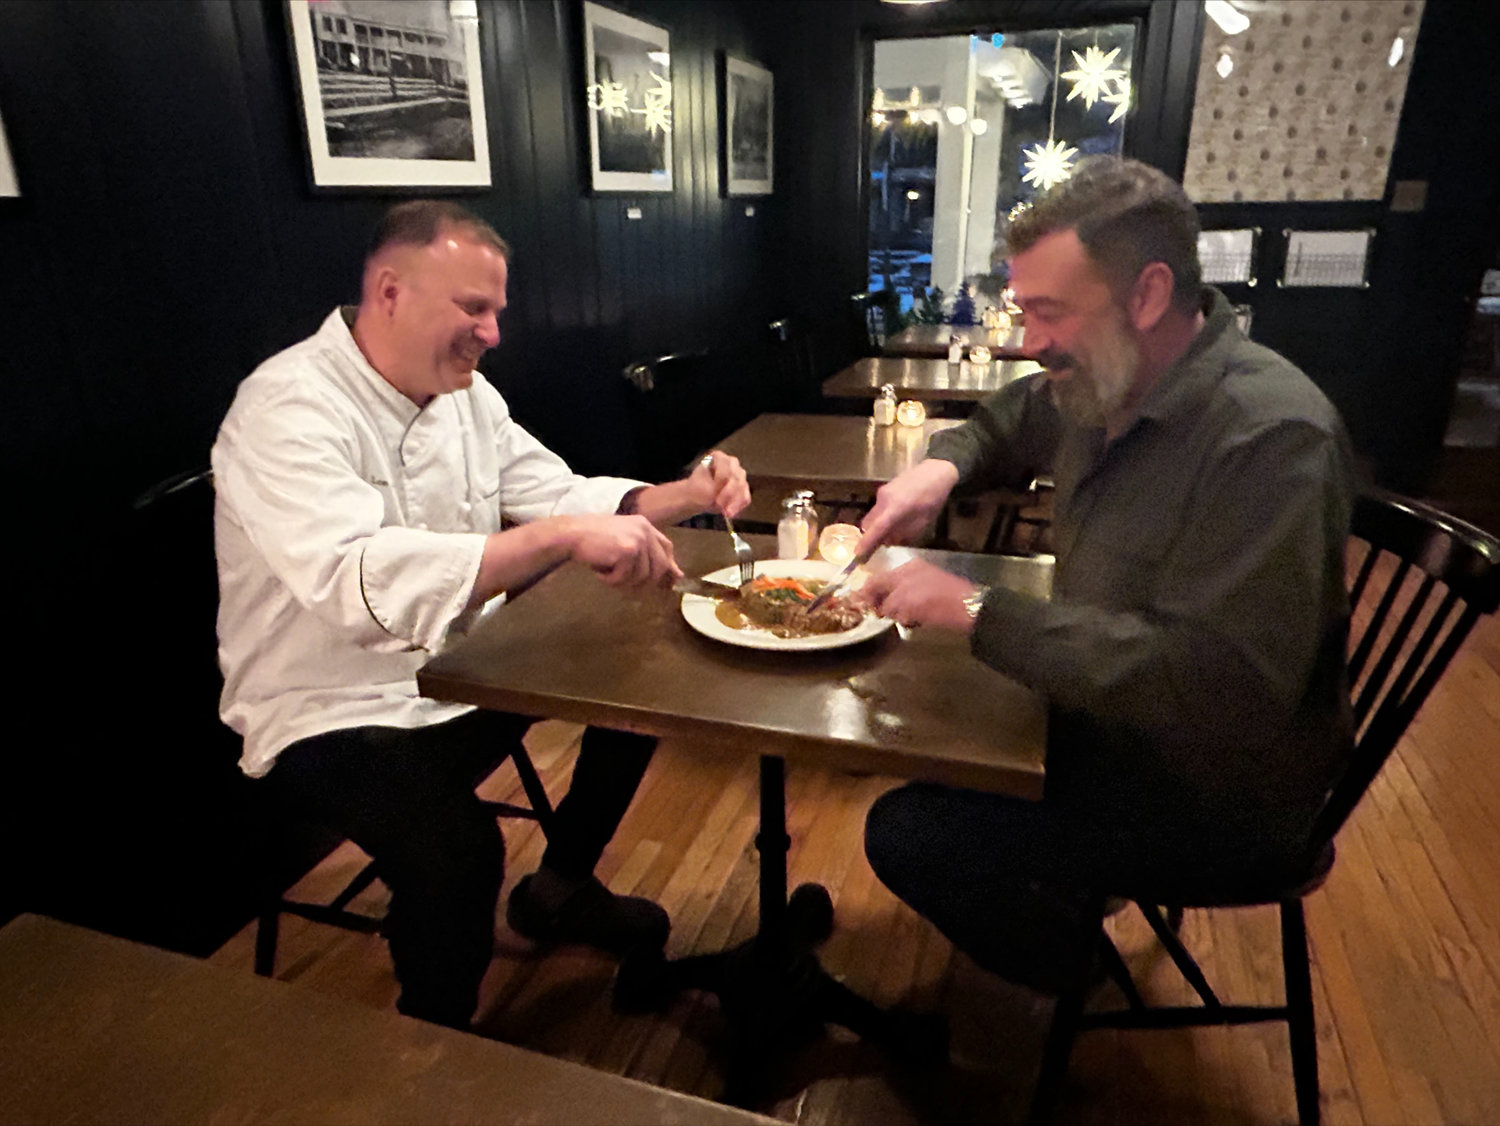 The Andes Hotel owner Derek Curl and Kivell share a meal.